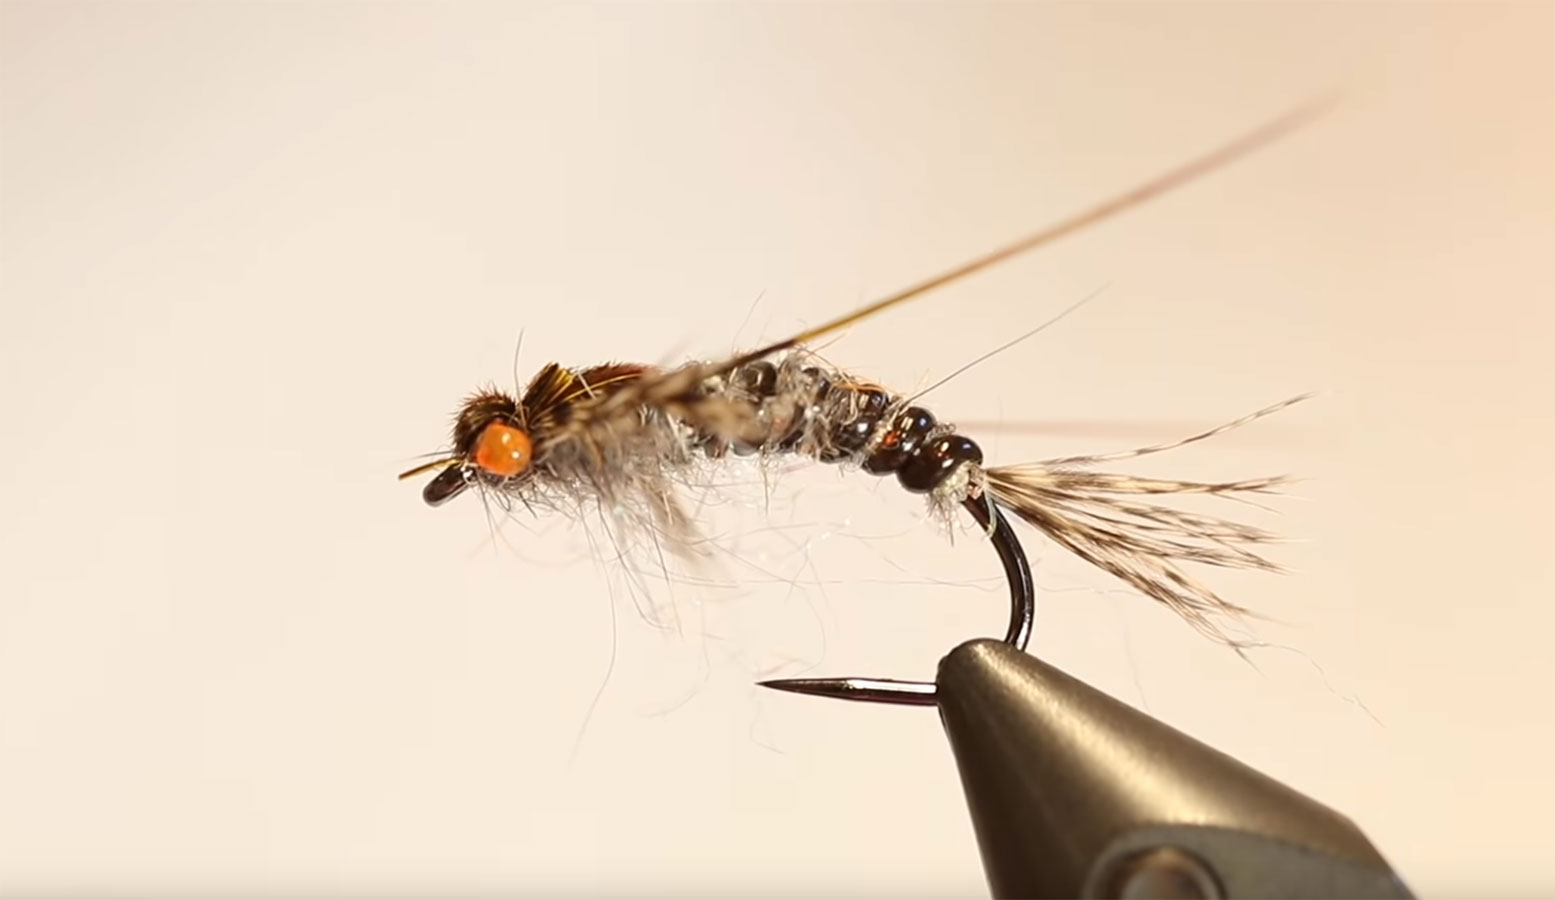 How to Tie a Swimming Caddis Nymph | MidCurrent